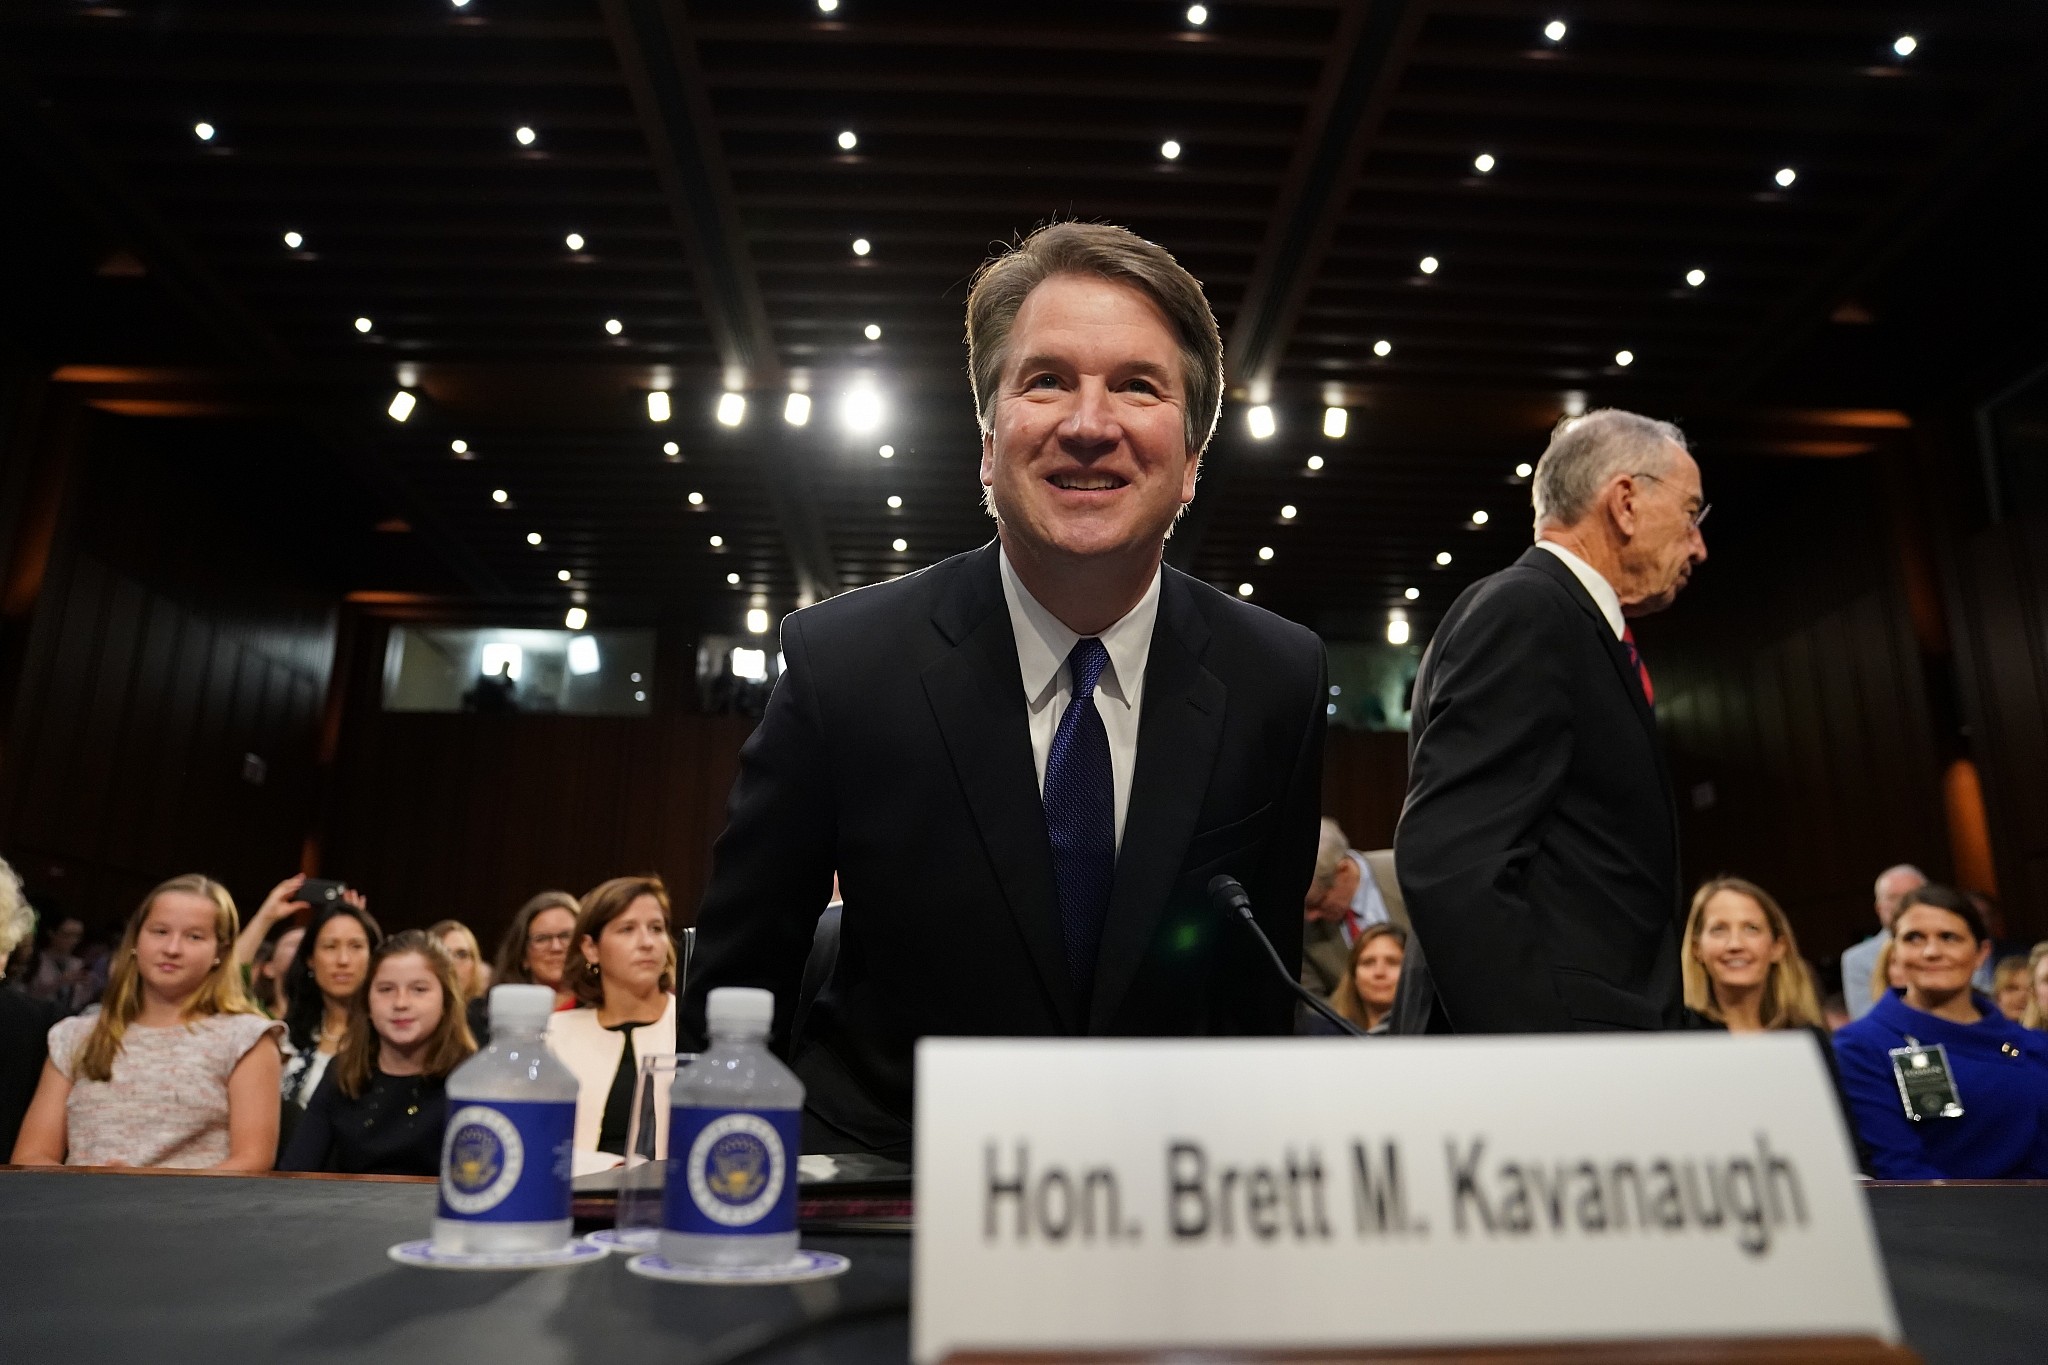 Chaos marks start of Kavanaugh Supreme Court confirmation hearing The